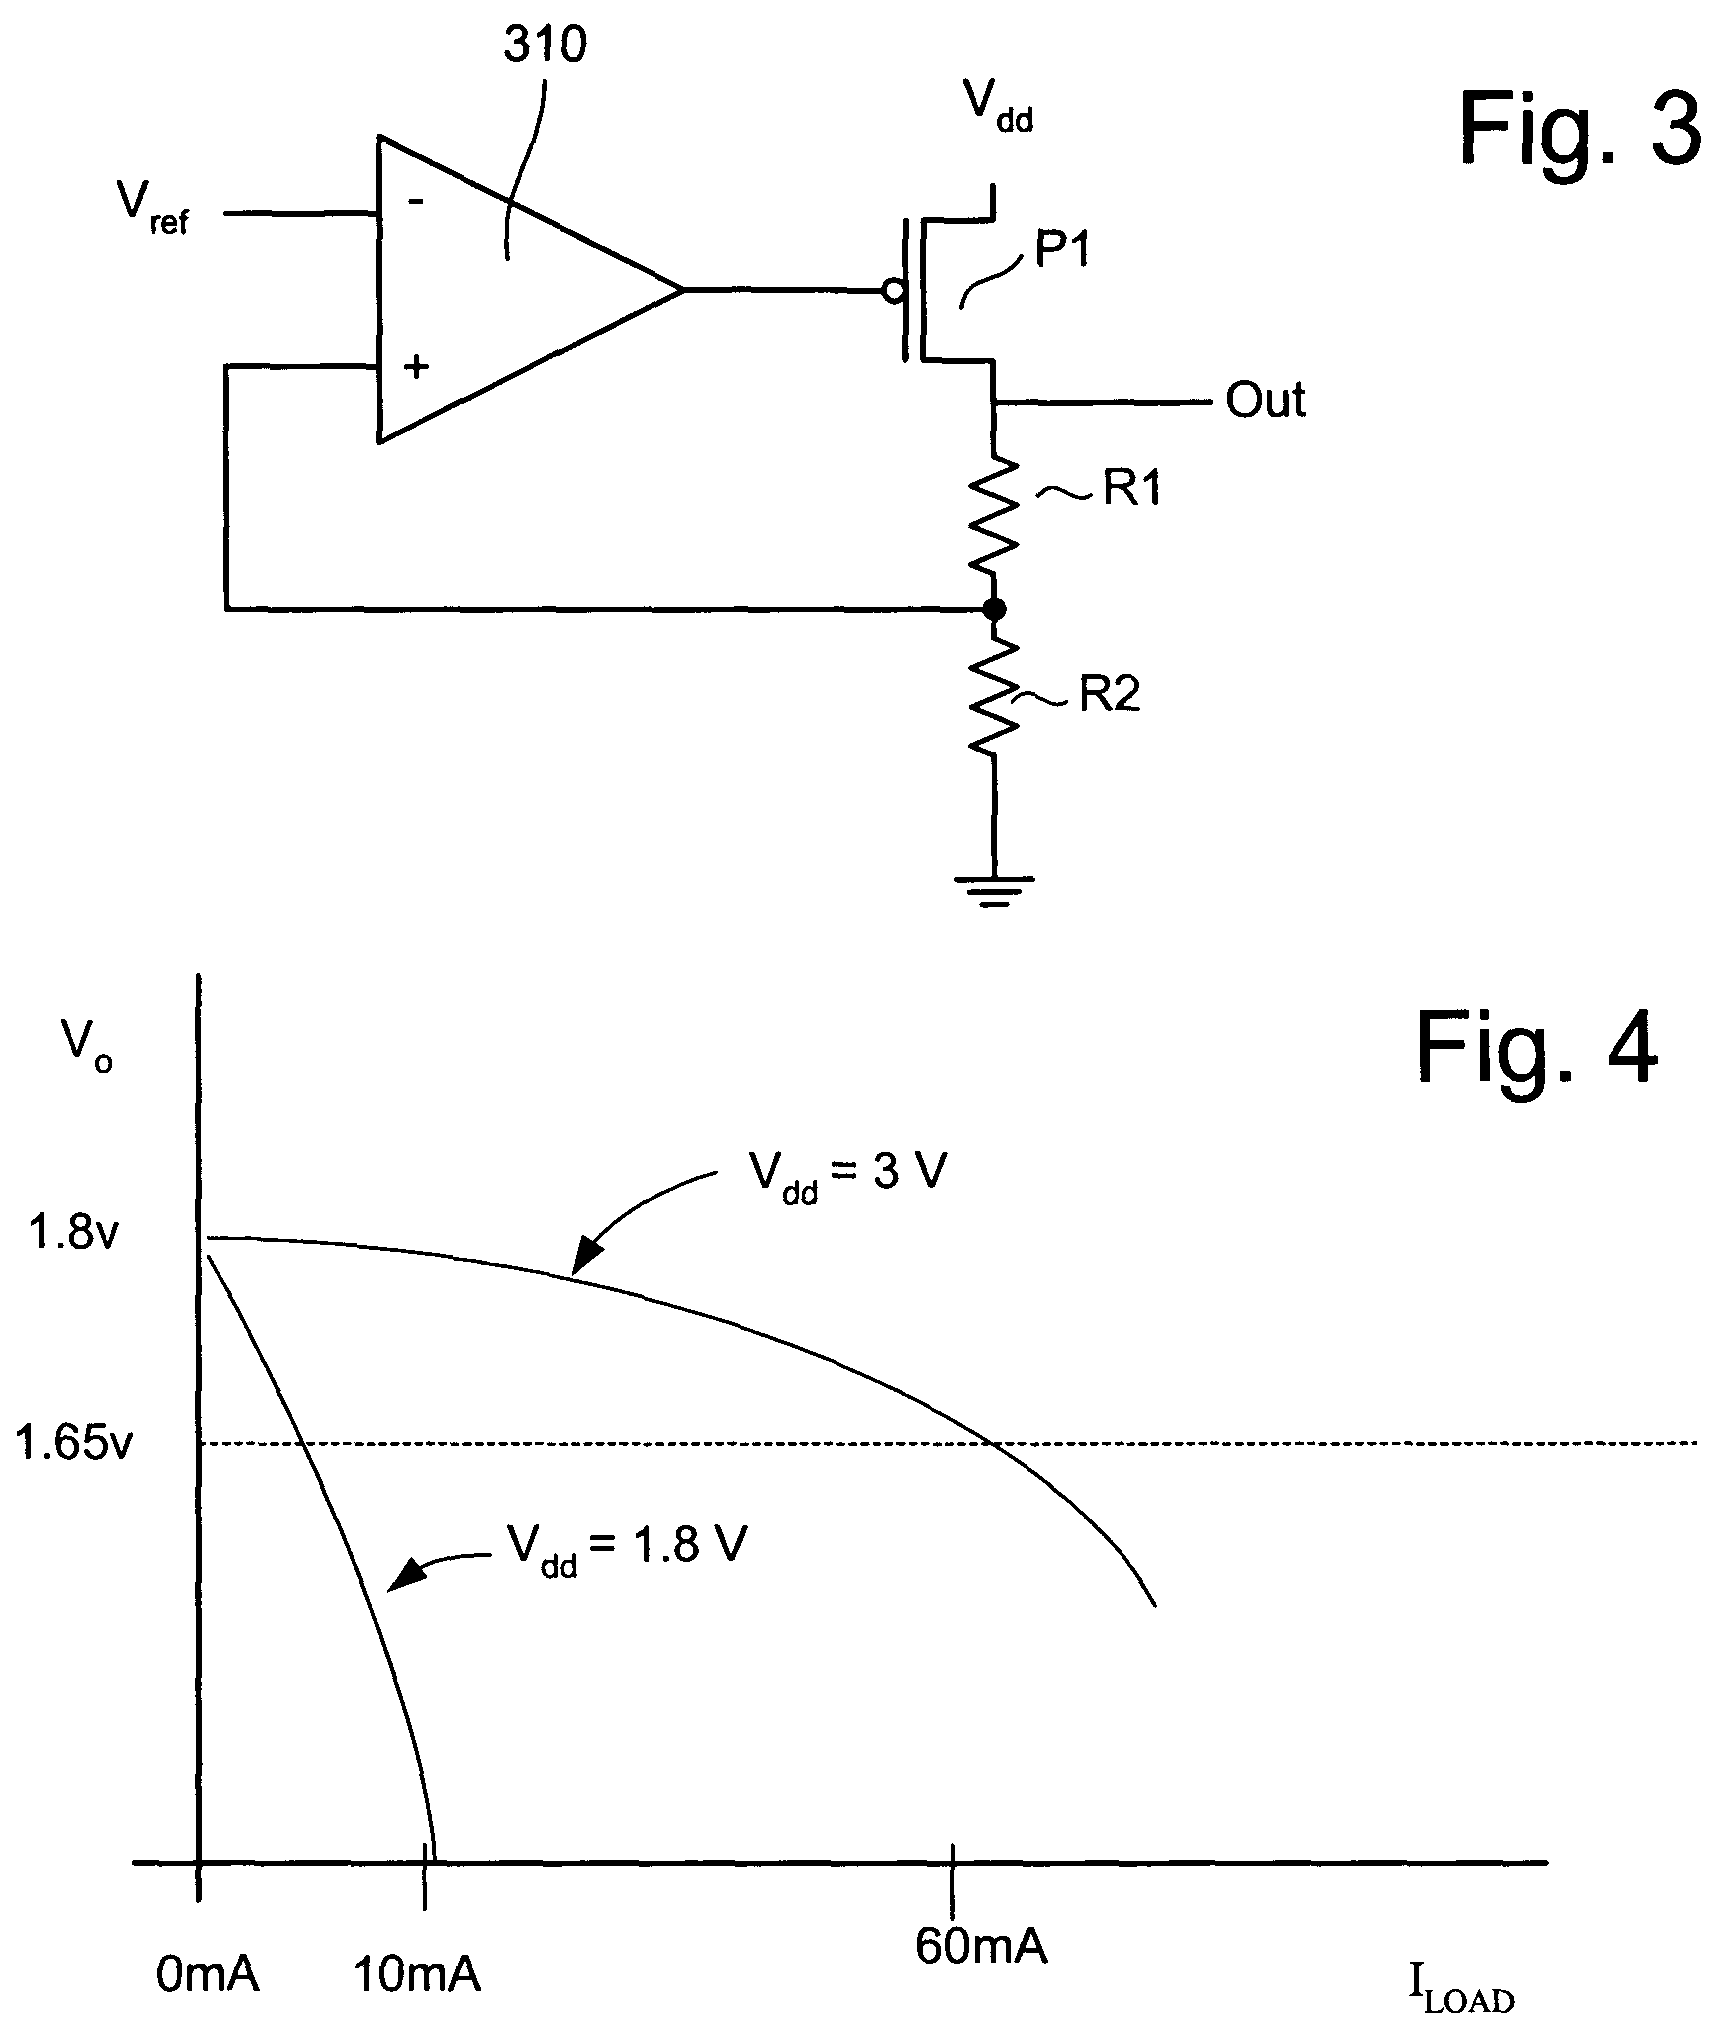 Voltage regulator with bypass for multi-voltage storage system